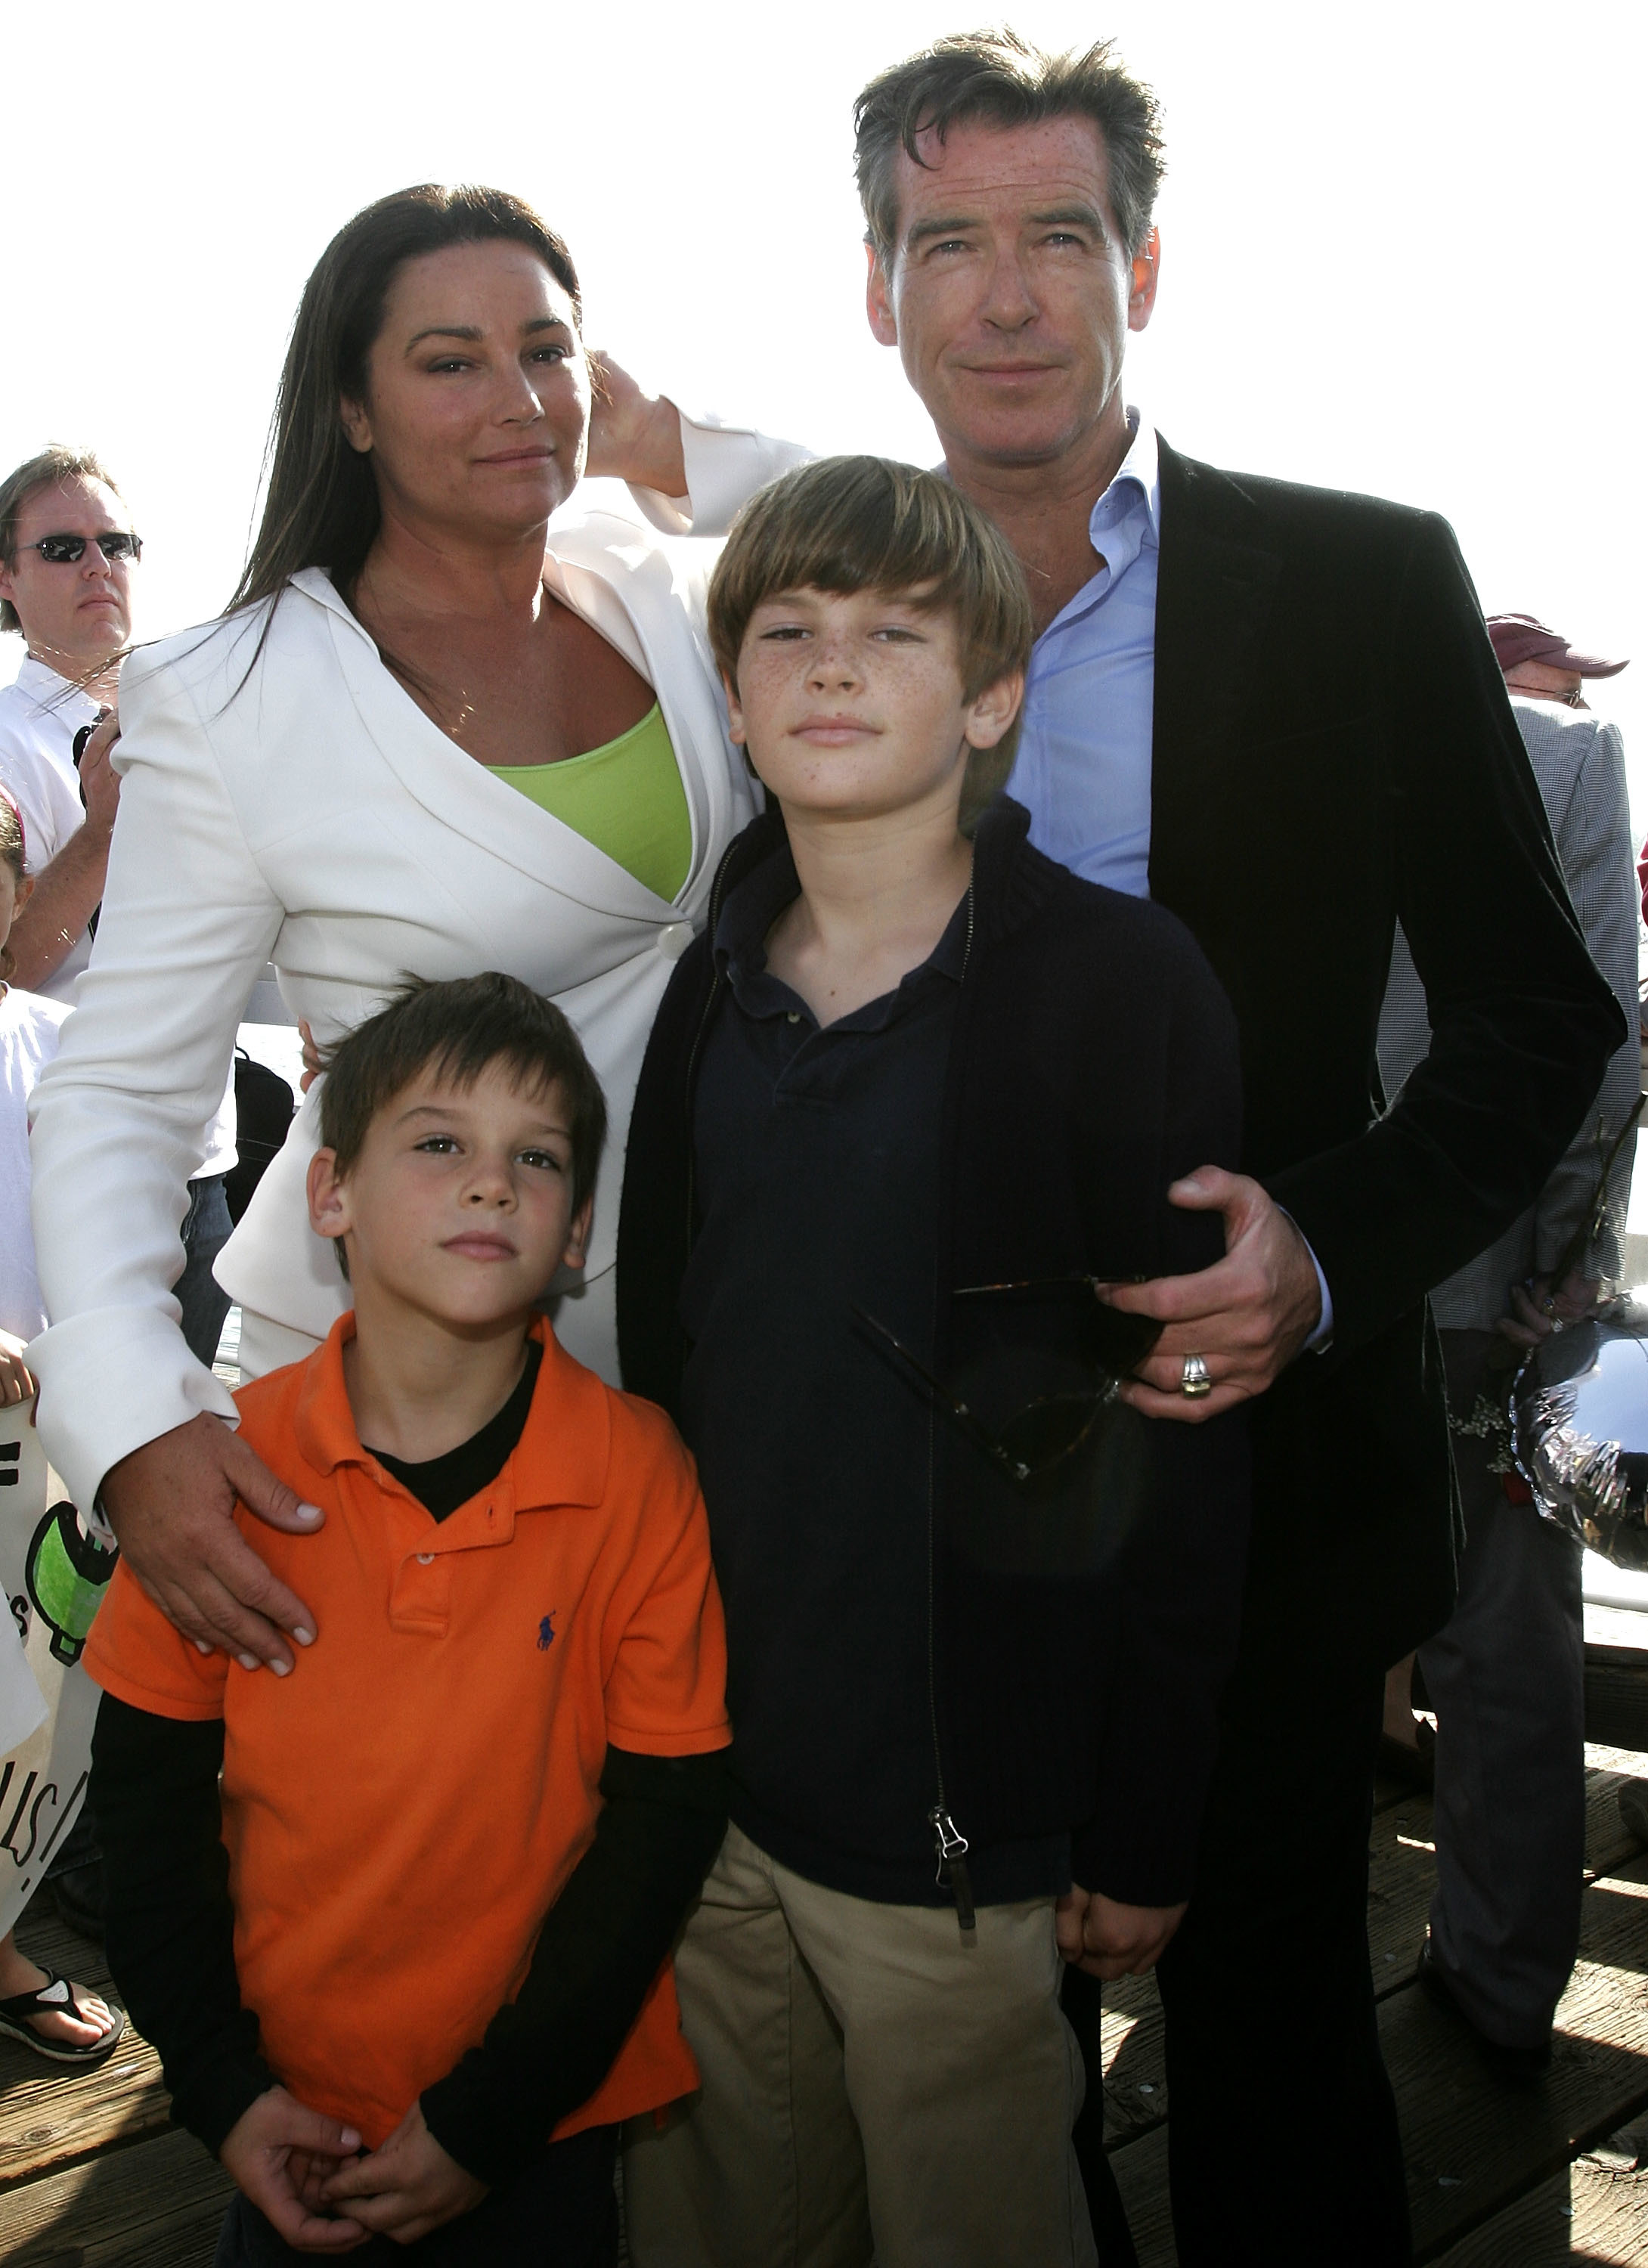 <p><a href="https://www.wonderwall.com/celebrity/profiles/overview/pierce-brosnan-571.article">Pierce Brosnan</a>'s youngest son, Paris Brosnan, turned 21 on Feb. 27, 2022. Look at him here at age 6 with mom Keely Shaye Smith and older brother Dylan, then 10, at a press conference for Terminate The Terminal in Malibu on March 10, 2007. See what he looks like these days, next!</p>